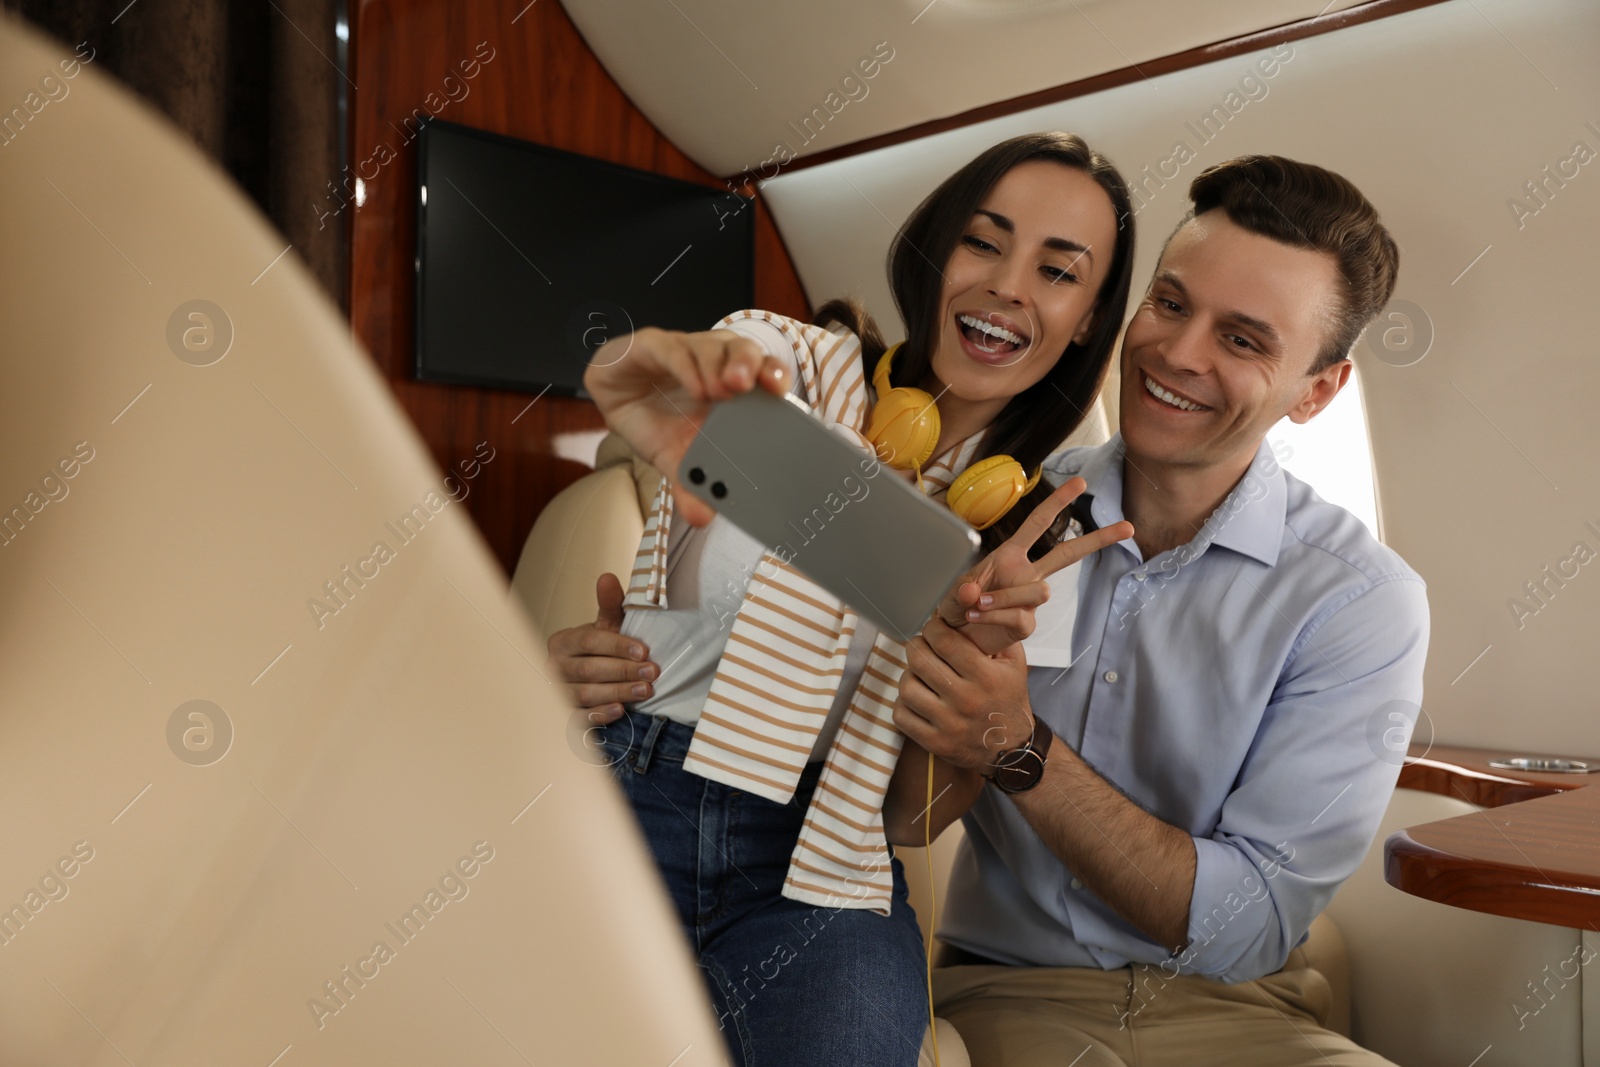 Photo of Lovely young couple taking selfie in airplane during flight